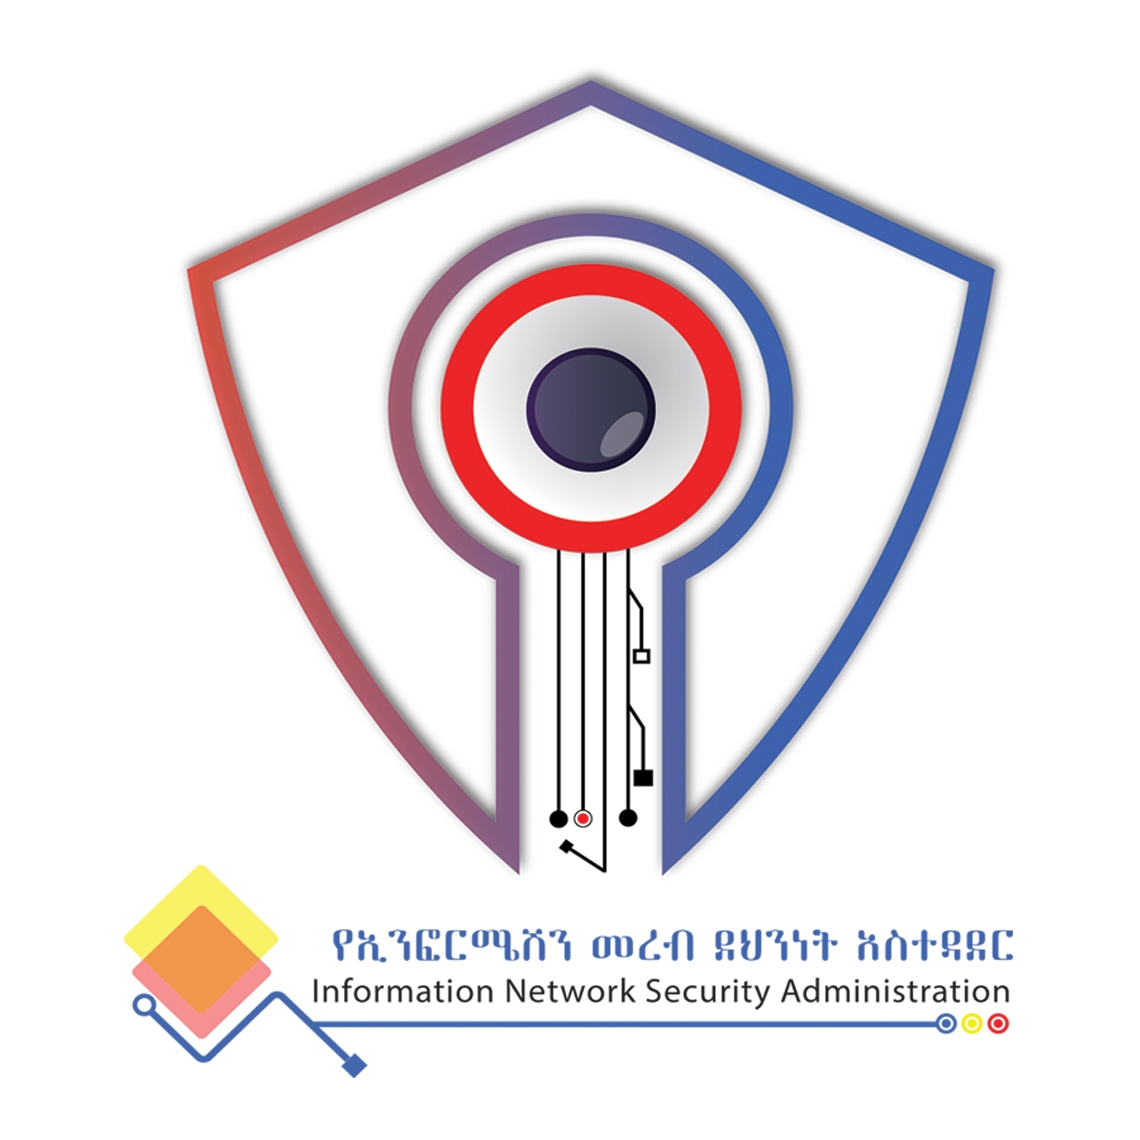 Information Network Security Agency